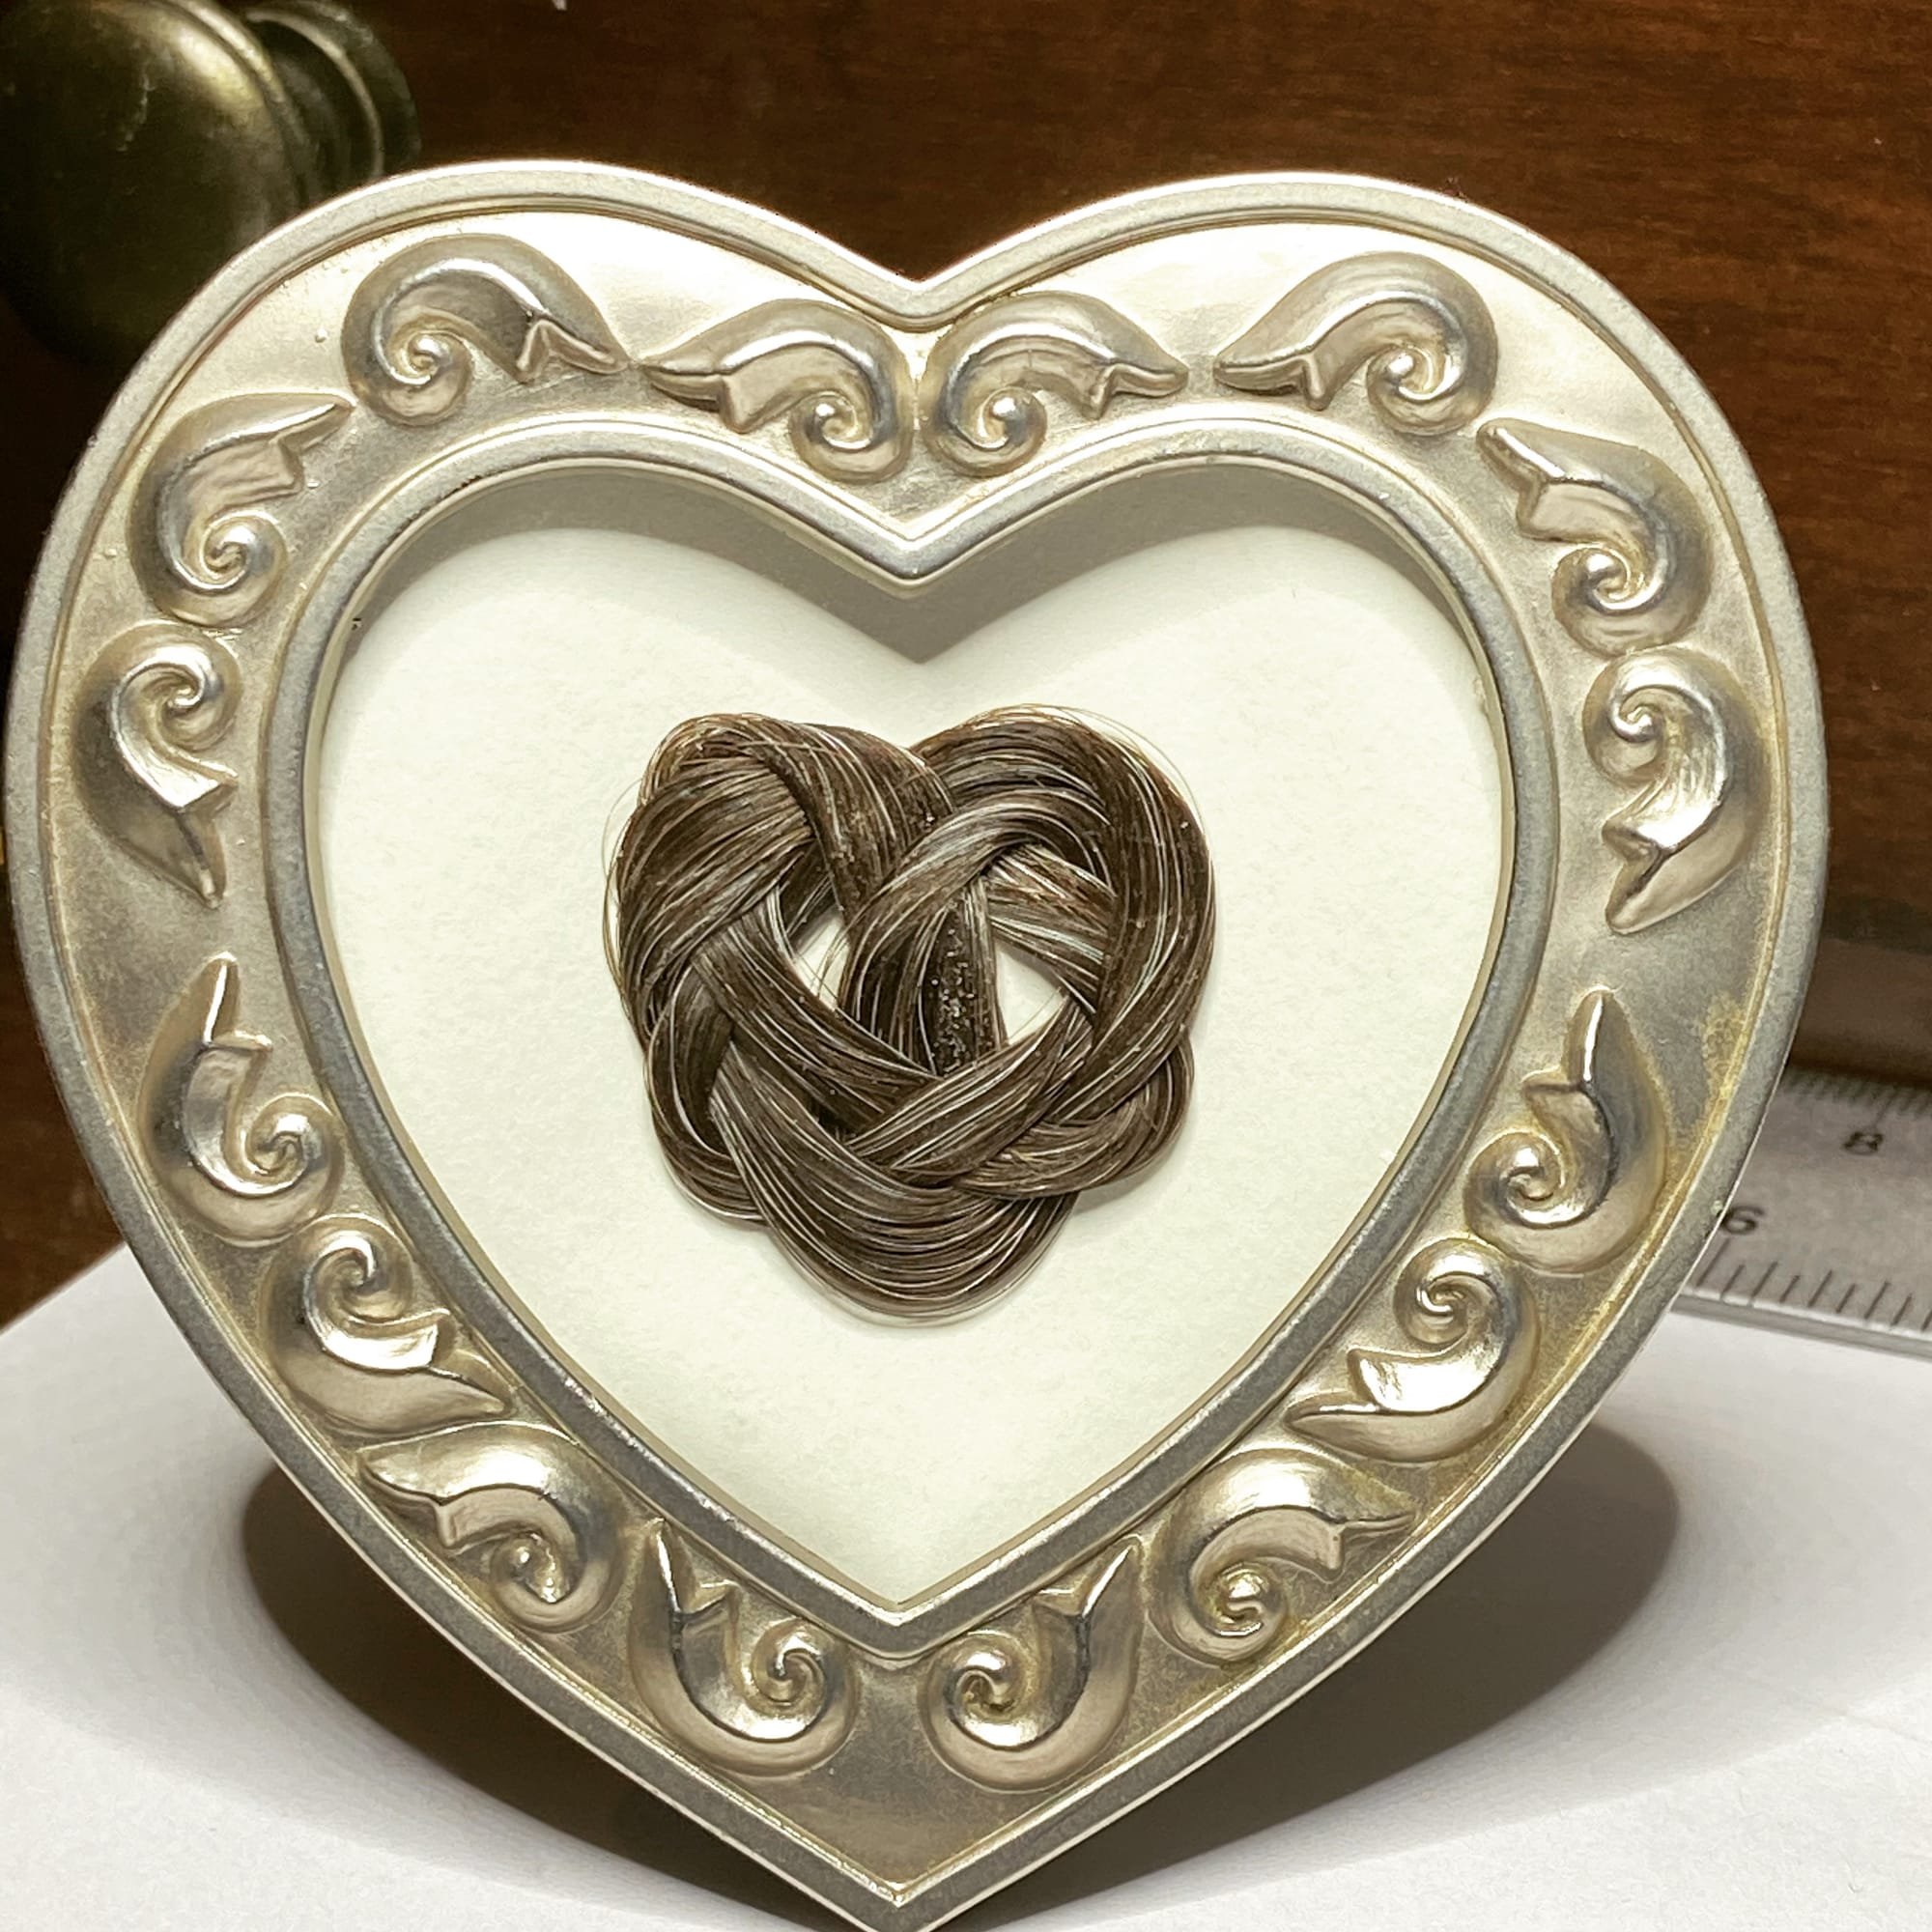 A Celtic heart knot in the silver strands of a Mother